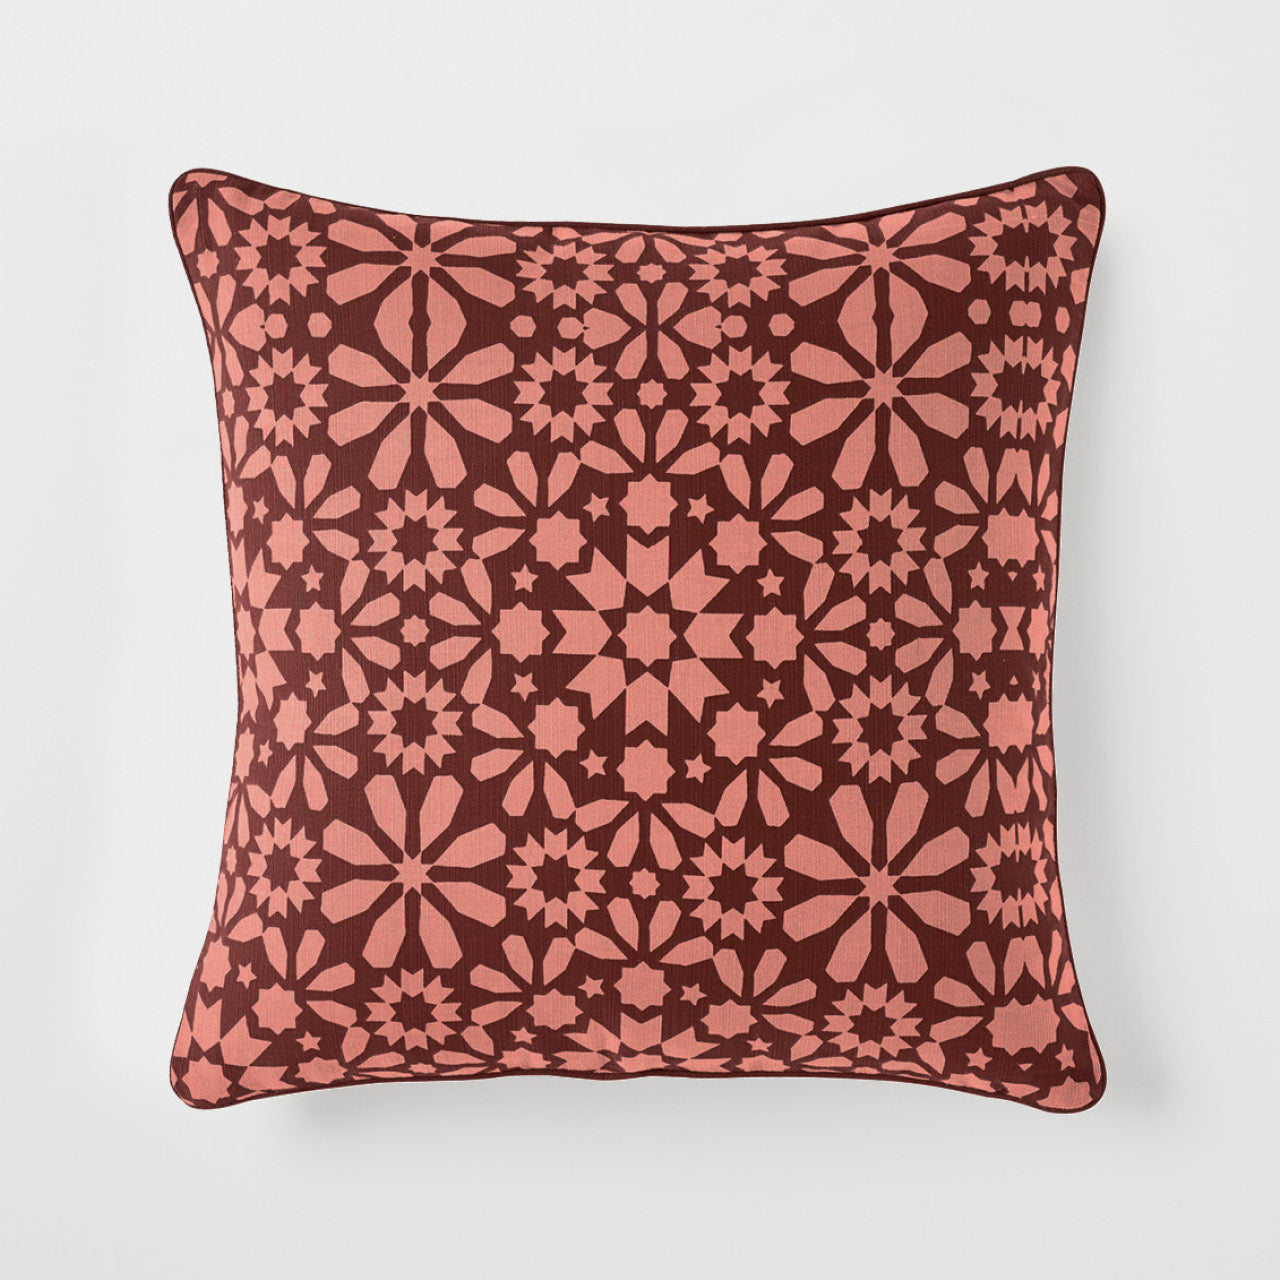 Licola Cushion Cover on a white background